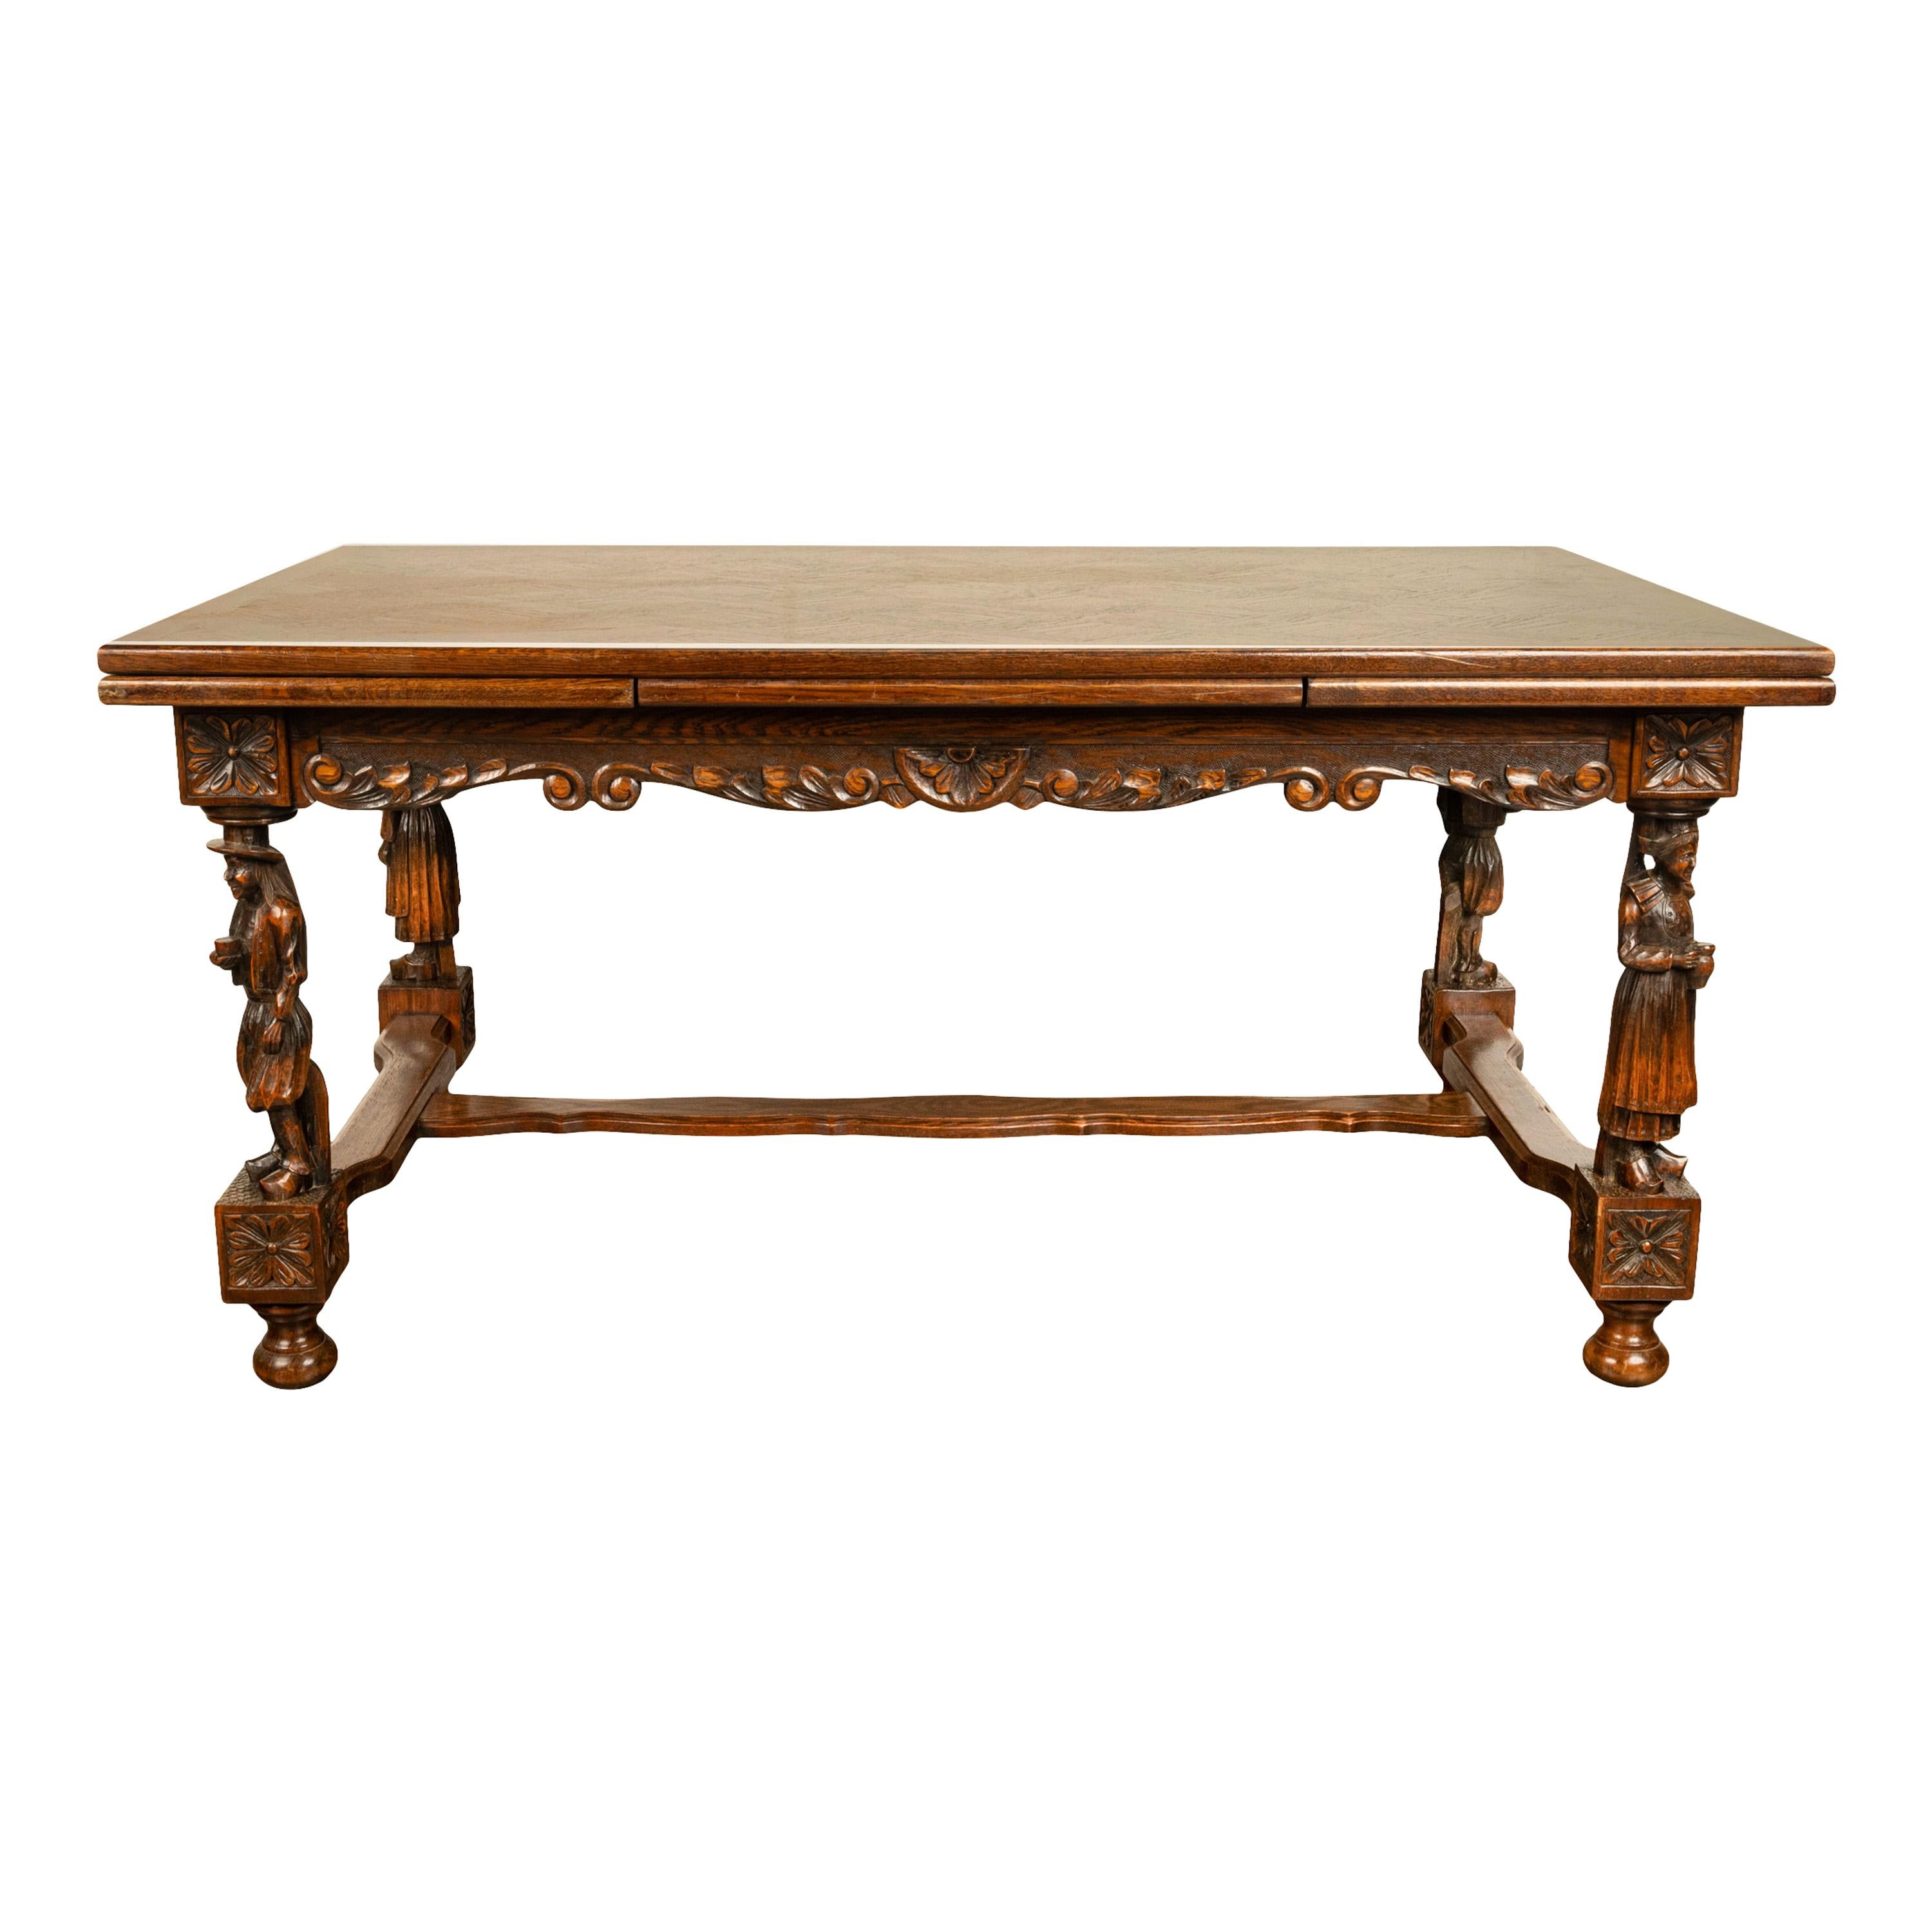 French Provincial Antique Carved Figural French Breton Inlaid Dining Extending Table Brittany 1900 For Sale